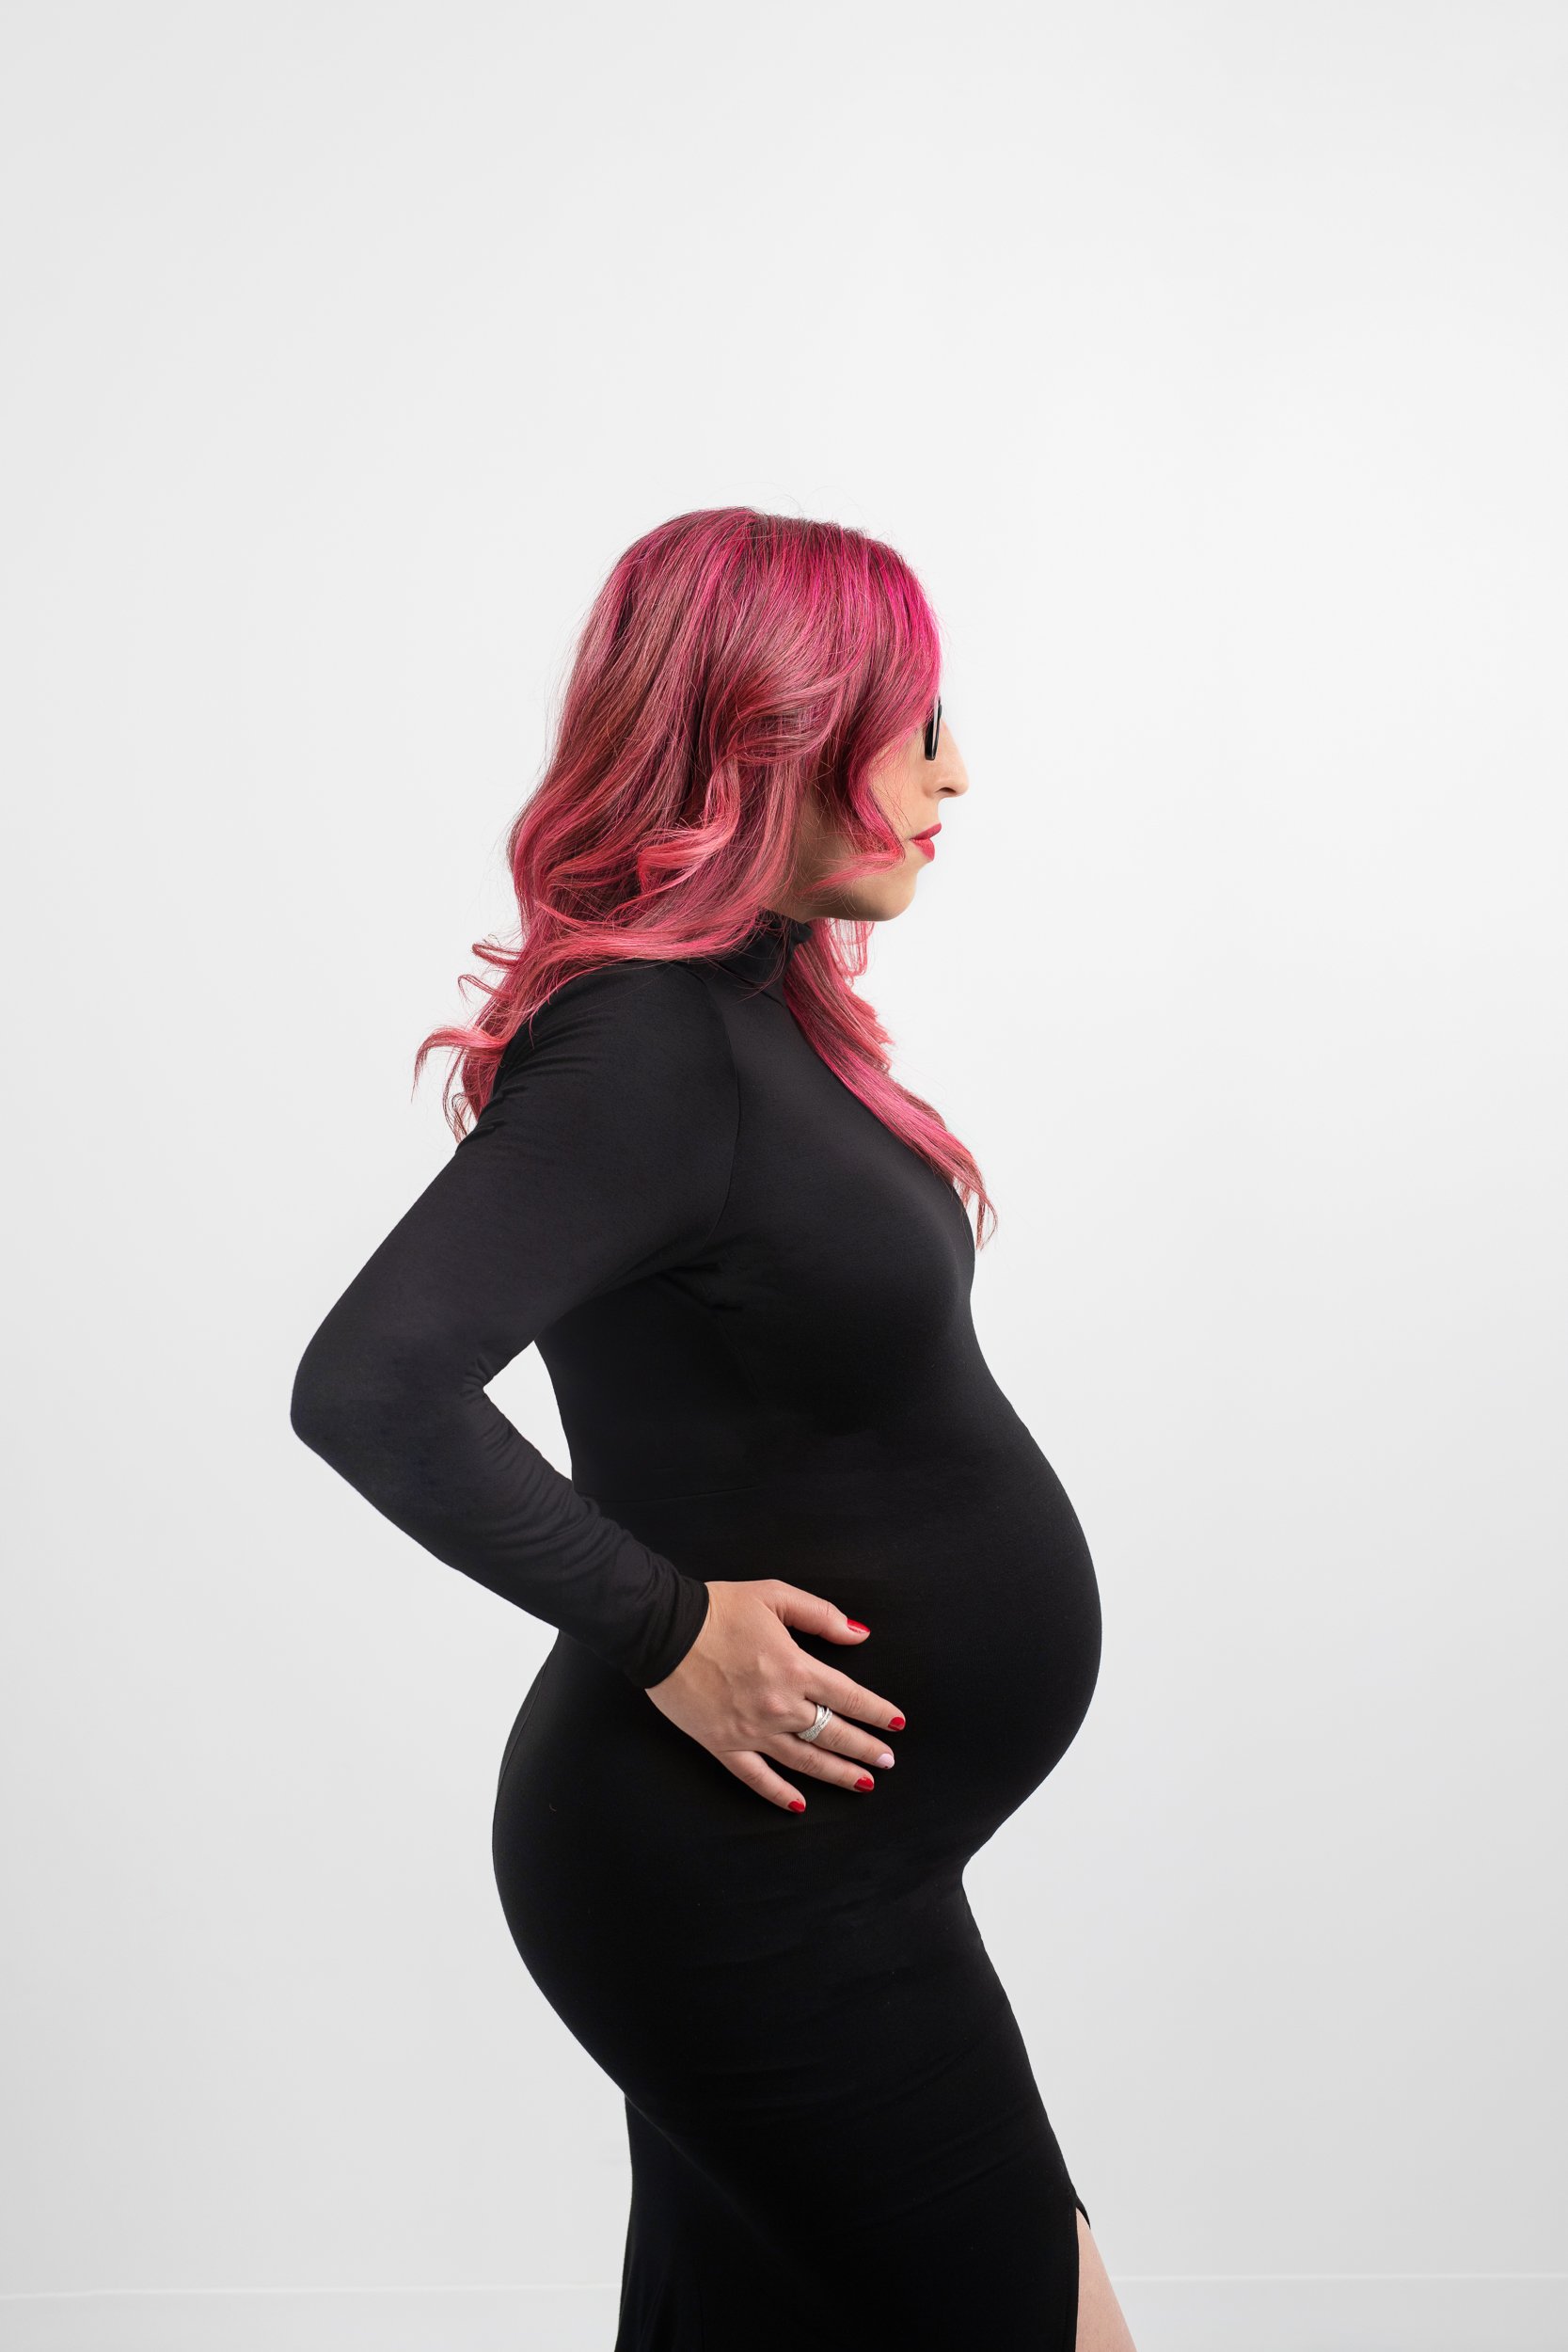  A mother with pink hair holds her bump and her silhouette is captured by Nicole Hawkins Photography. pregnancy silhouette pics #NicoleHawkinsPhotography #maternitysession #NJmaternityphotographer #NewJerseyphotographers #maternityphotos 